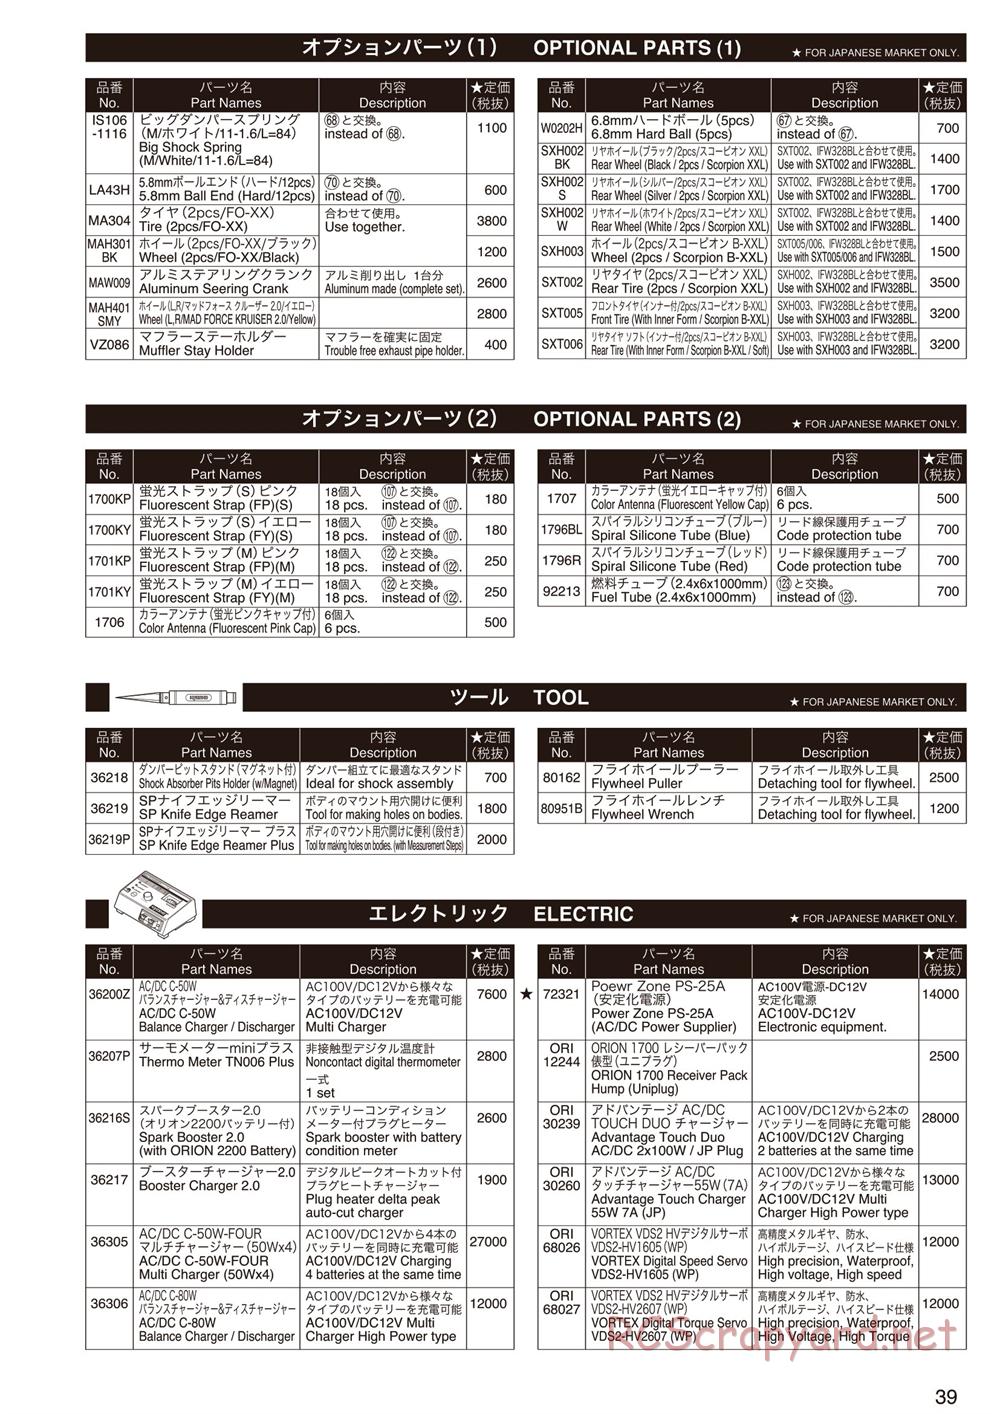 Kyosho - Mad Force Kruiser 2.0 - Parts List - Page 3